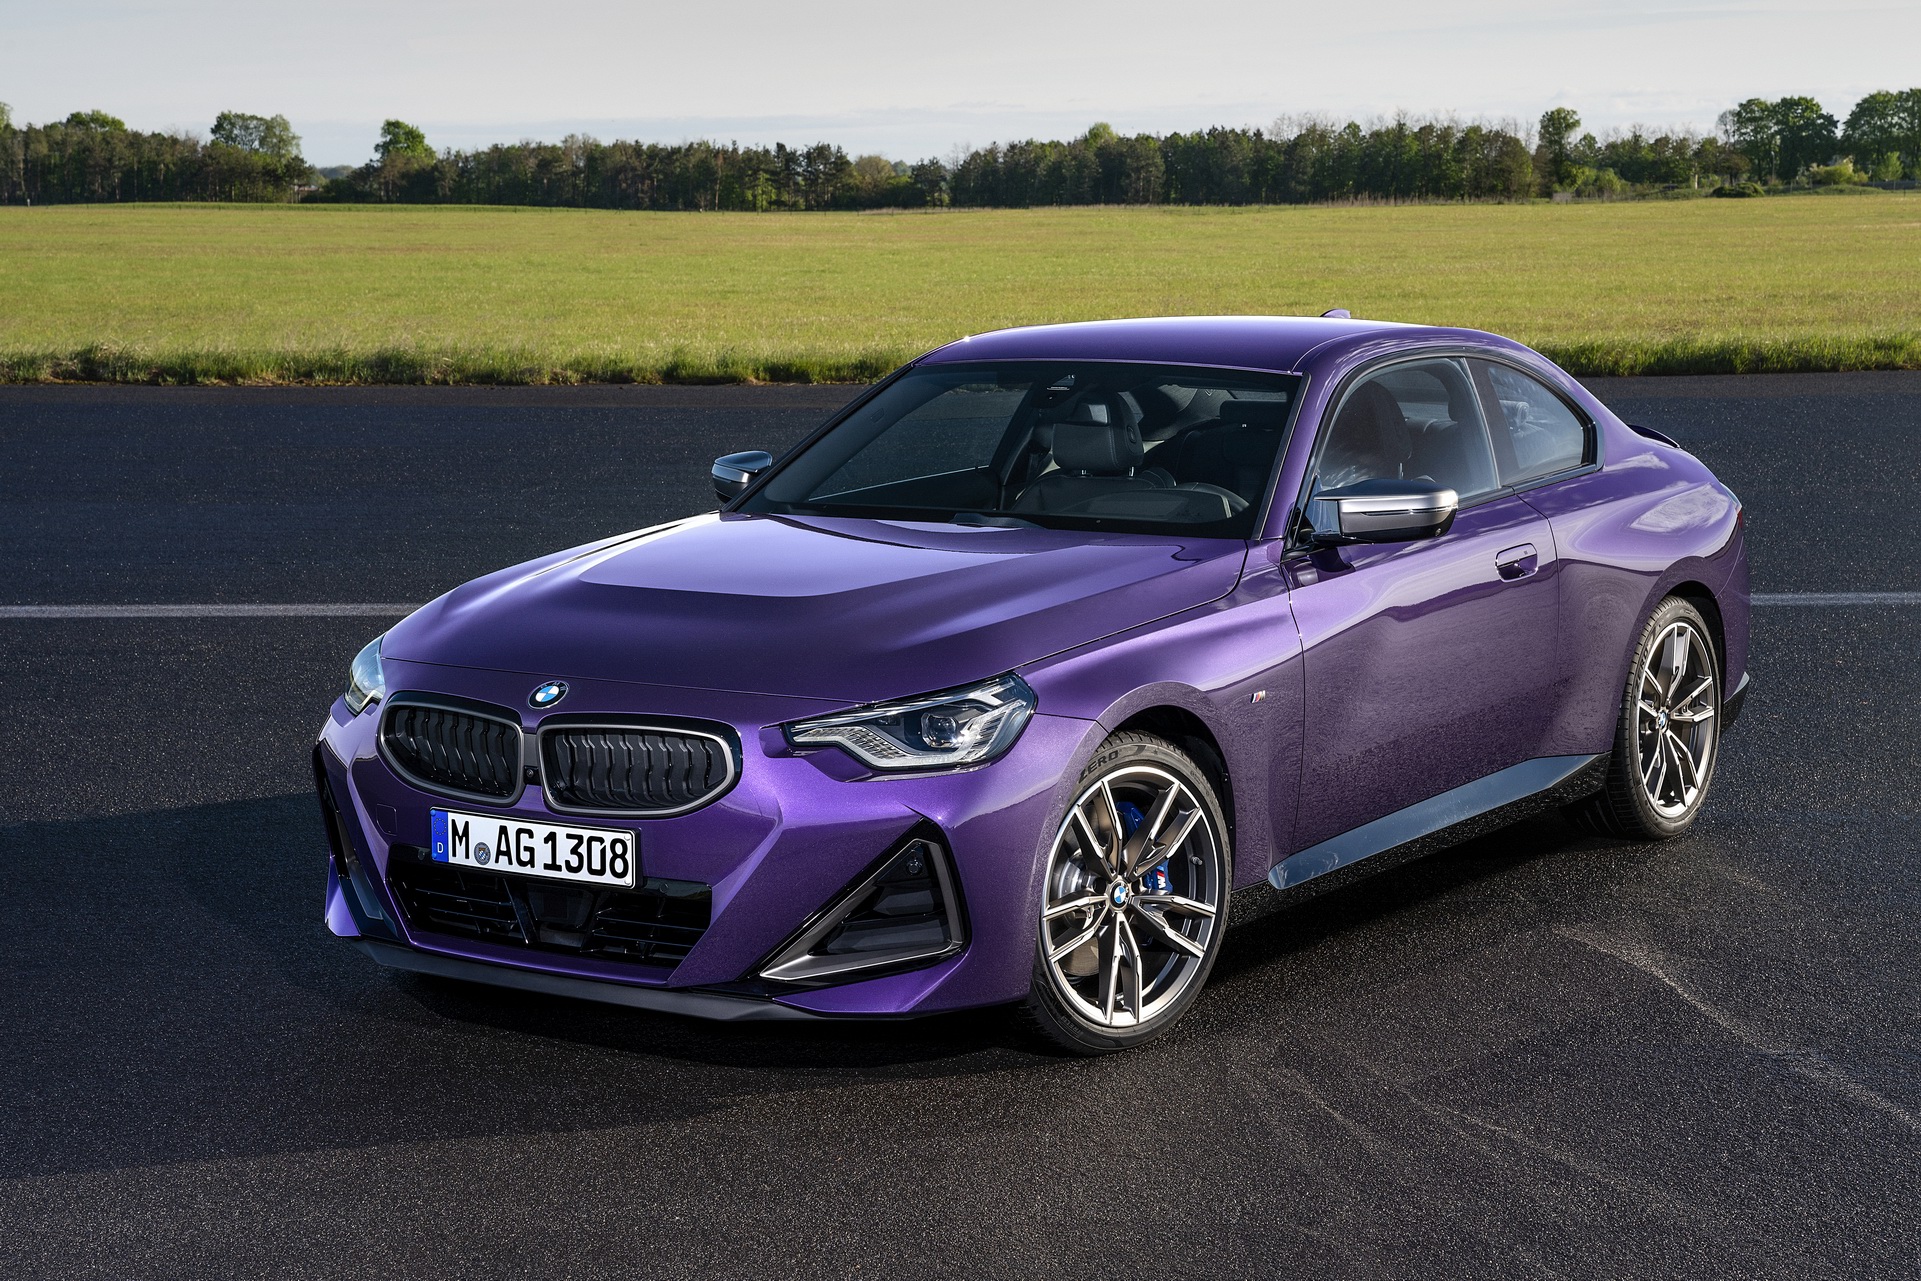 2022 BMW 2-Series Coupe Debuts With Slick Styling And Up To 382 HP, But